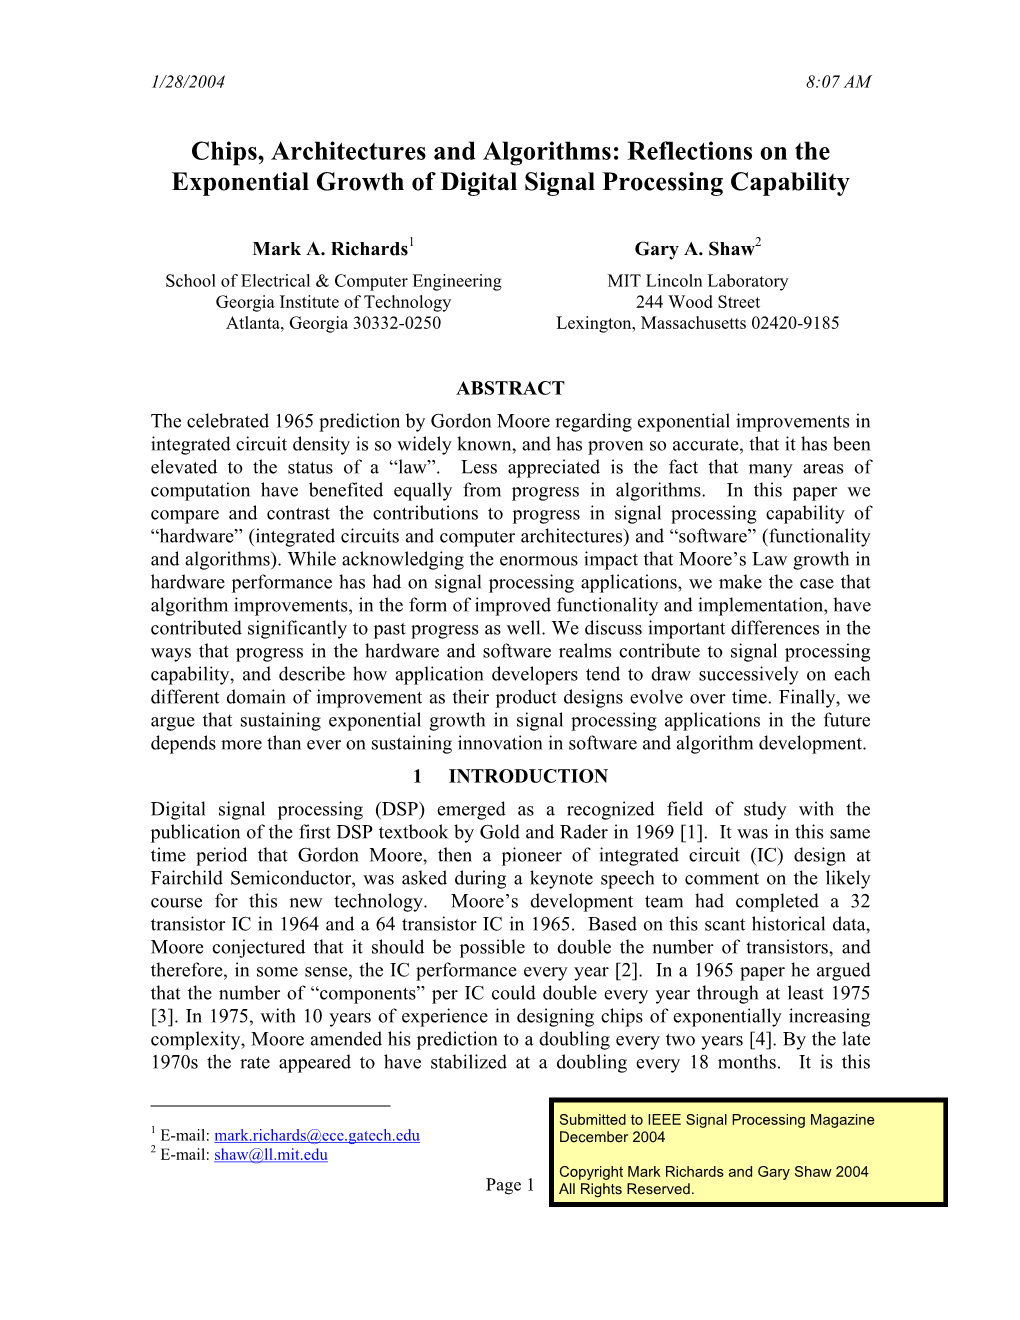 Reflections on the Exponential Growth of Digital Signal Processing Capability